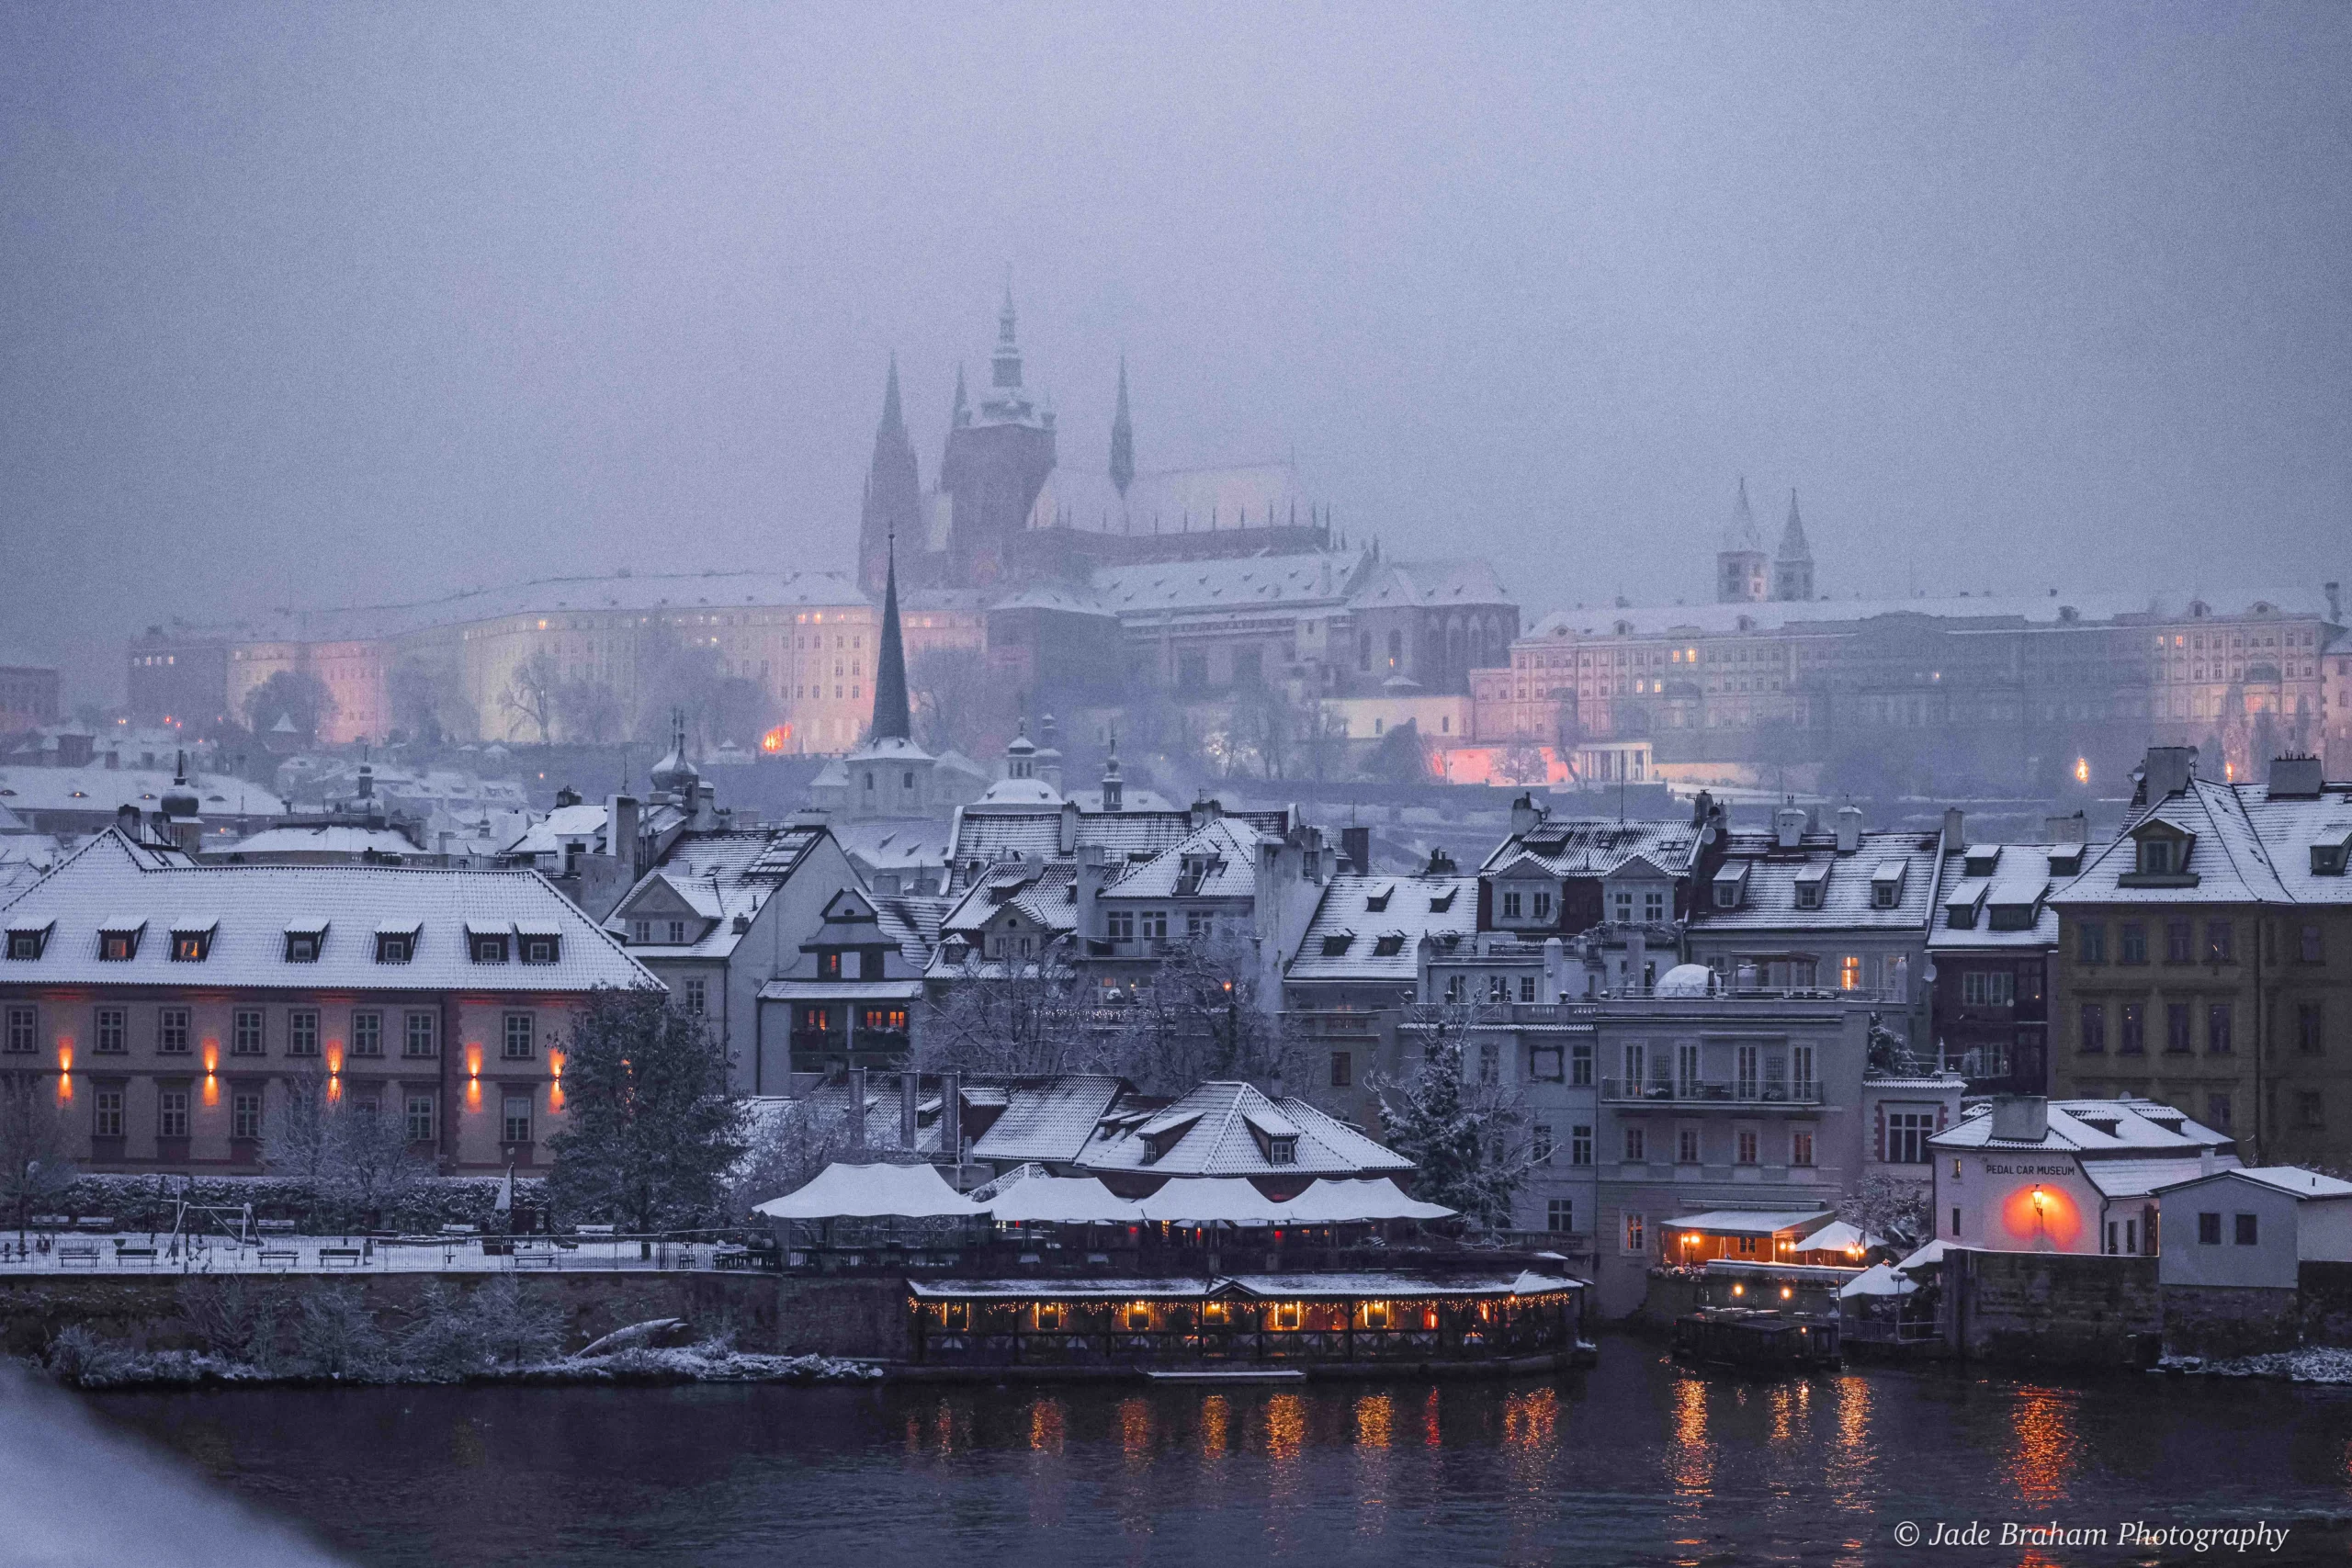 A weekend in Prague and you're standing on the bridge looking at the city covered in snow.